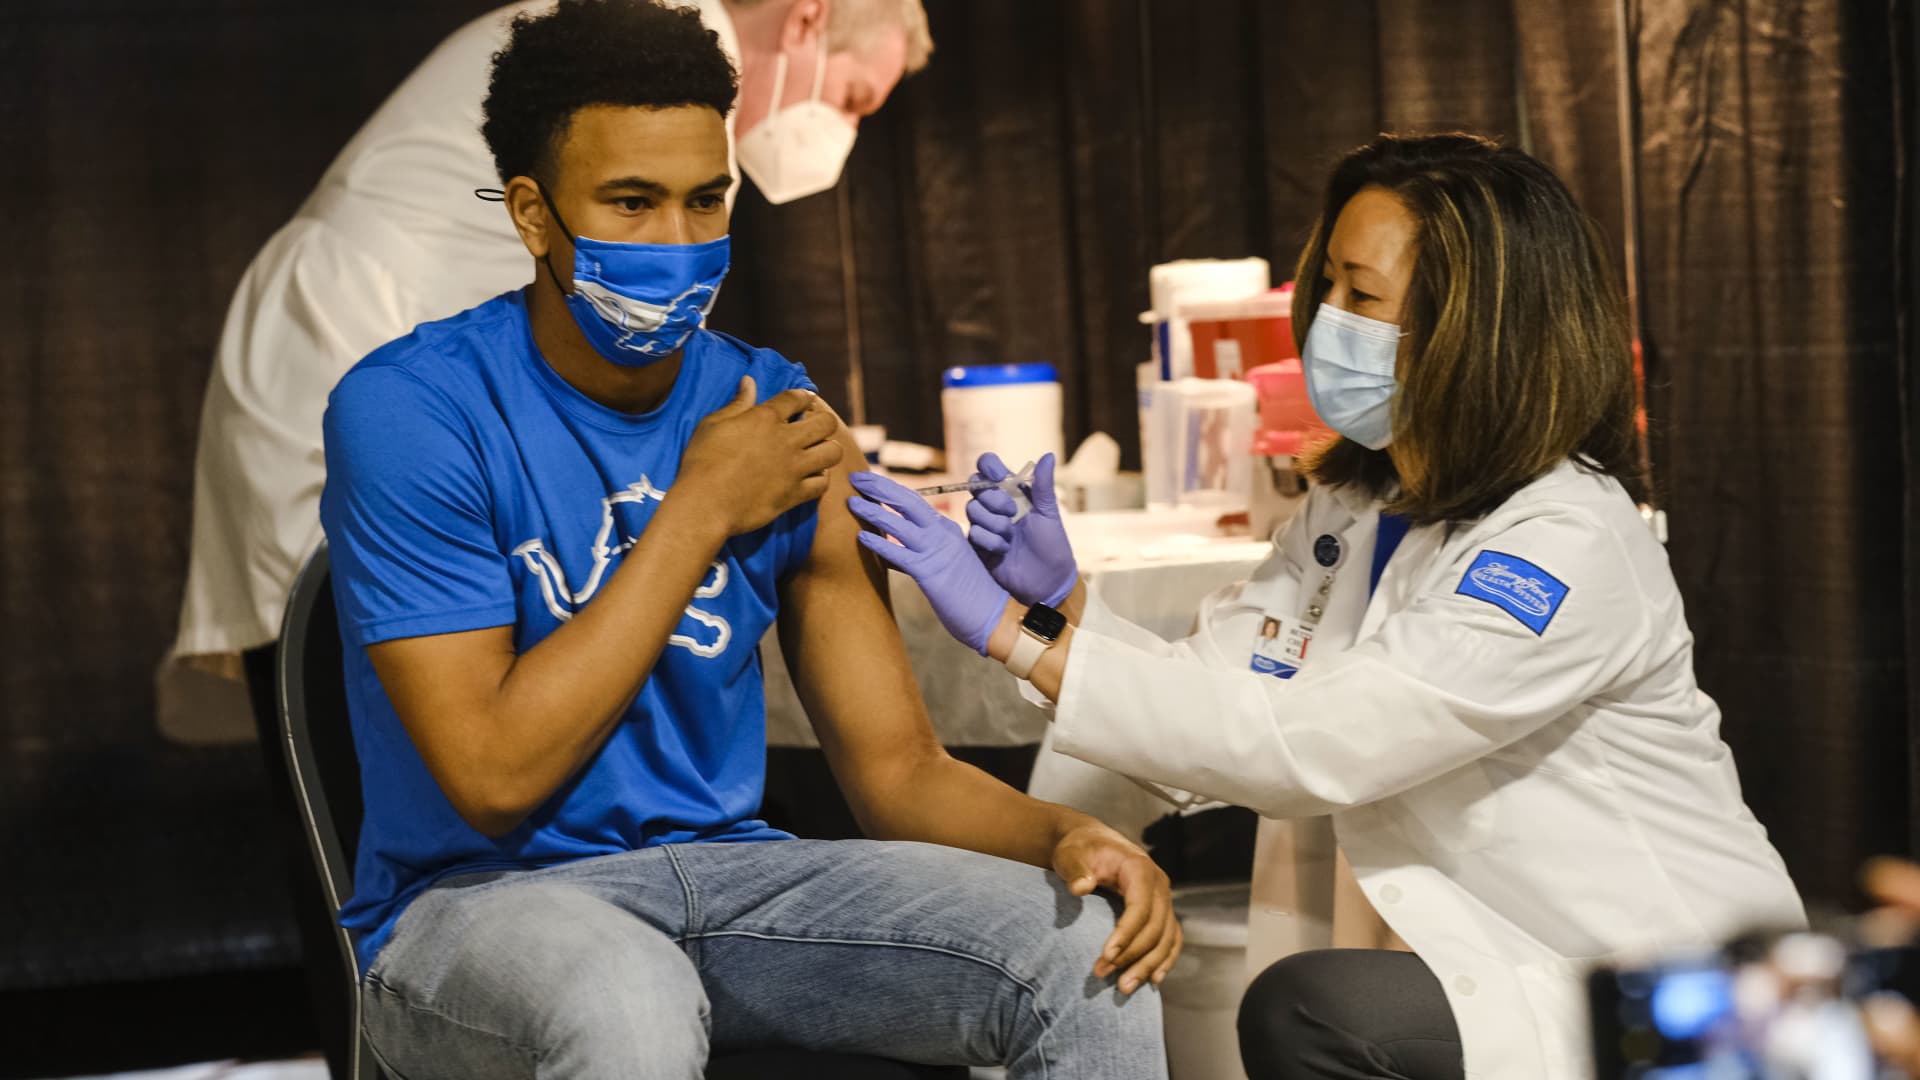 A group of teenagers serving as 'Covid-19 Student Ambassadors' joined Governor Gretchen Whitmer to receive a dose of the Pfizer Covid vaccine at Ford Field during an event to promote and encourage Michigan residents to go and get their vaccines on April 6, 2021 in Detroit, Michigan.